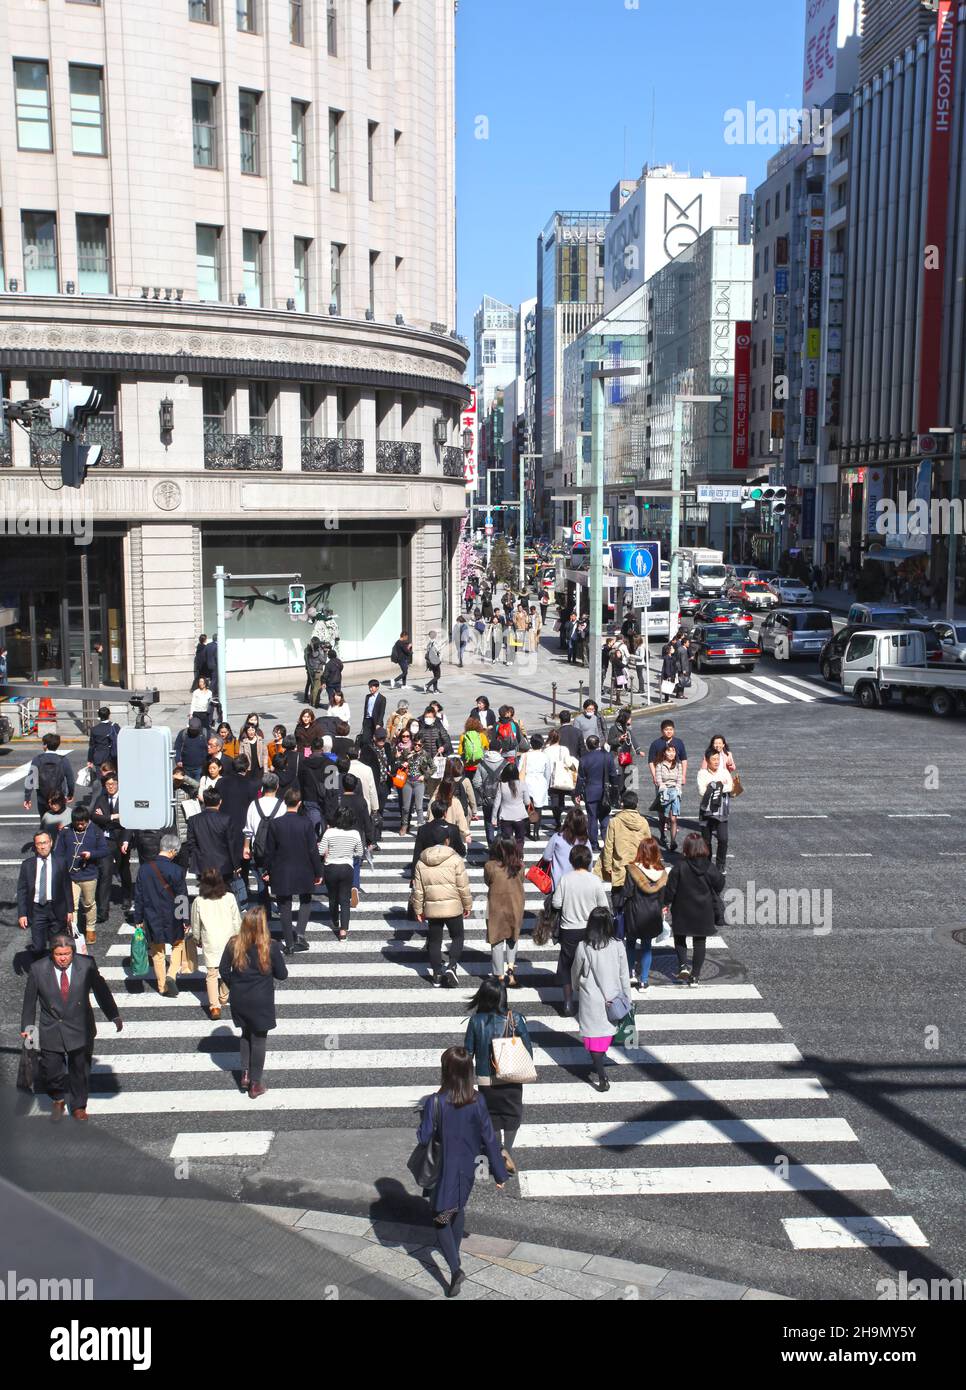 The pedestrian crossing with many people walking at the crossing between the Ricoh building and the Wako building in Ginza, Tokyo, Japan. Stock Photo